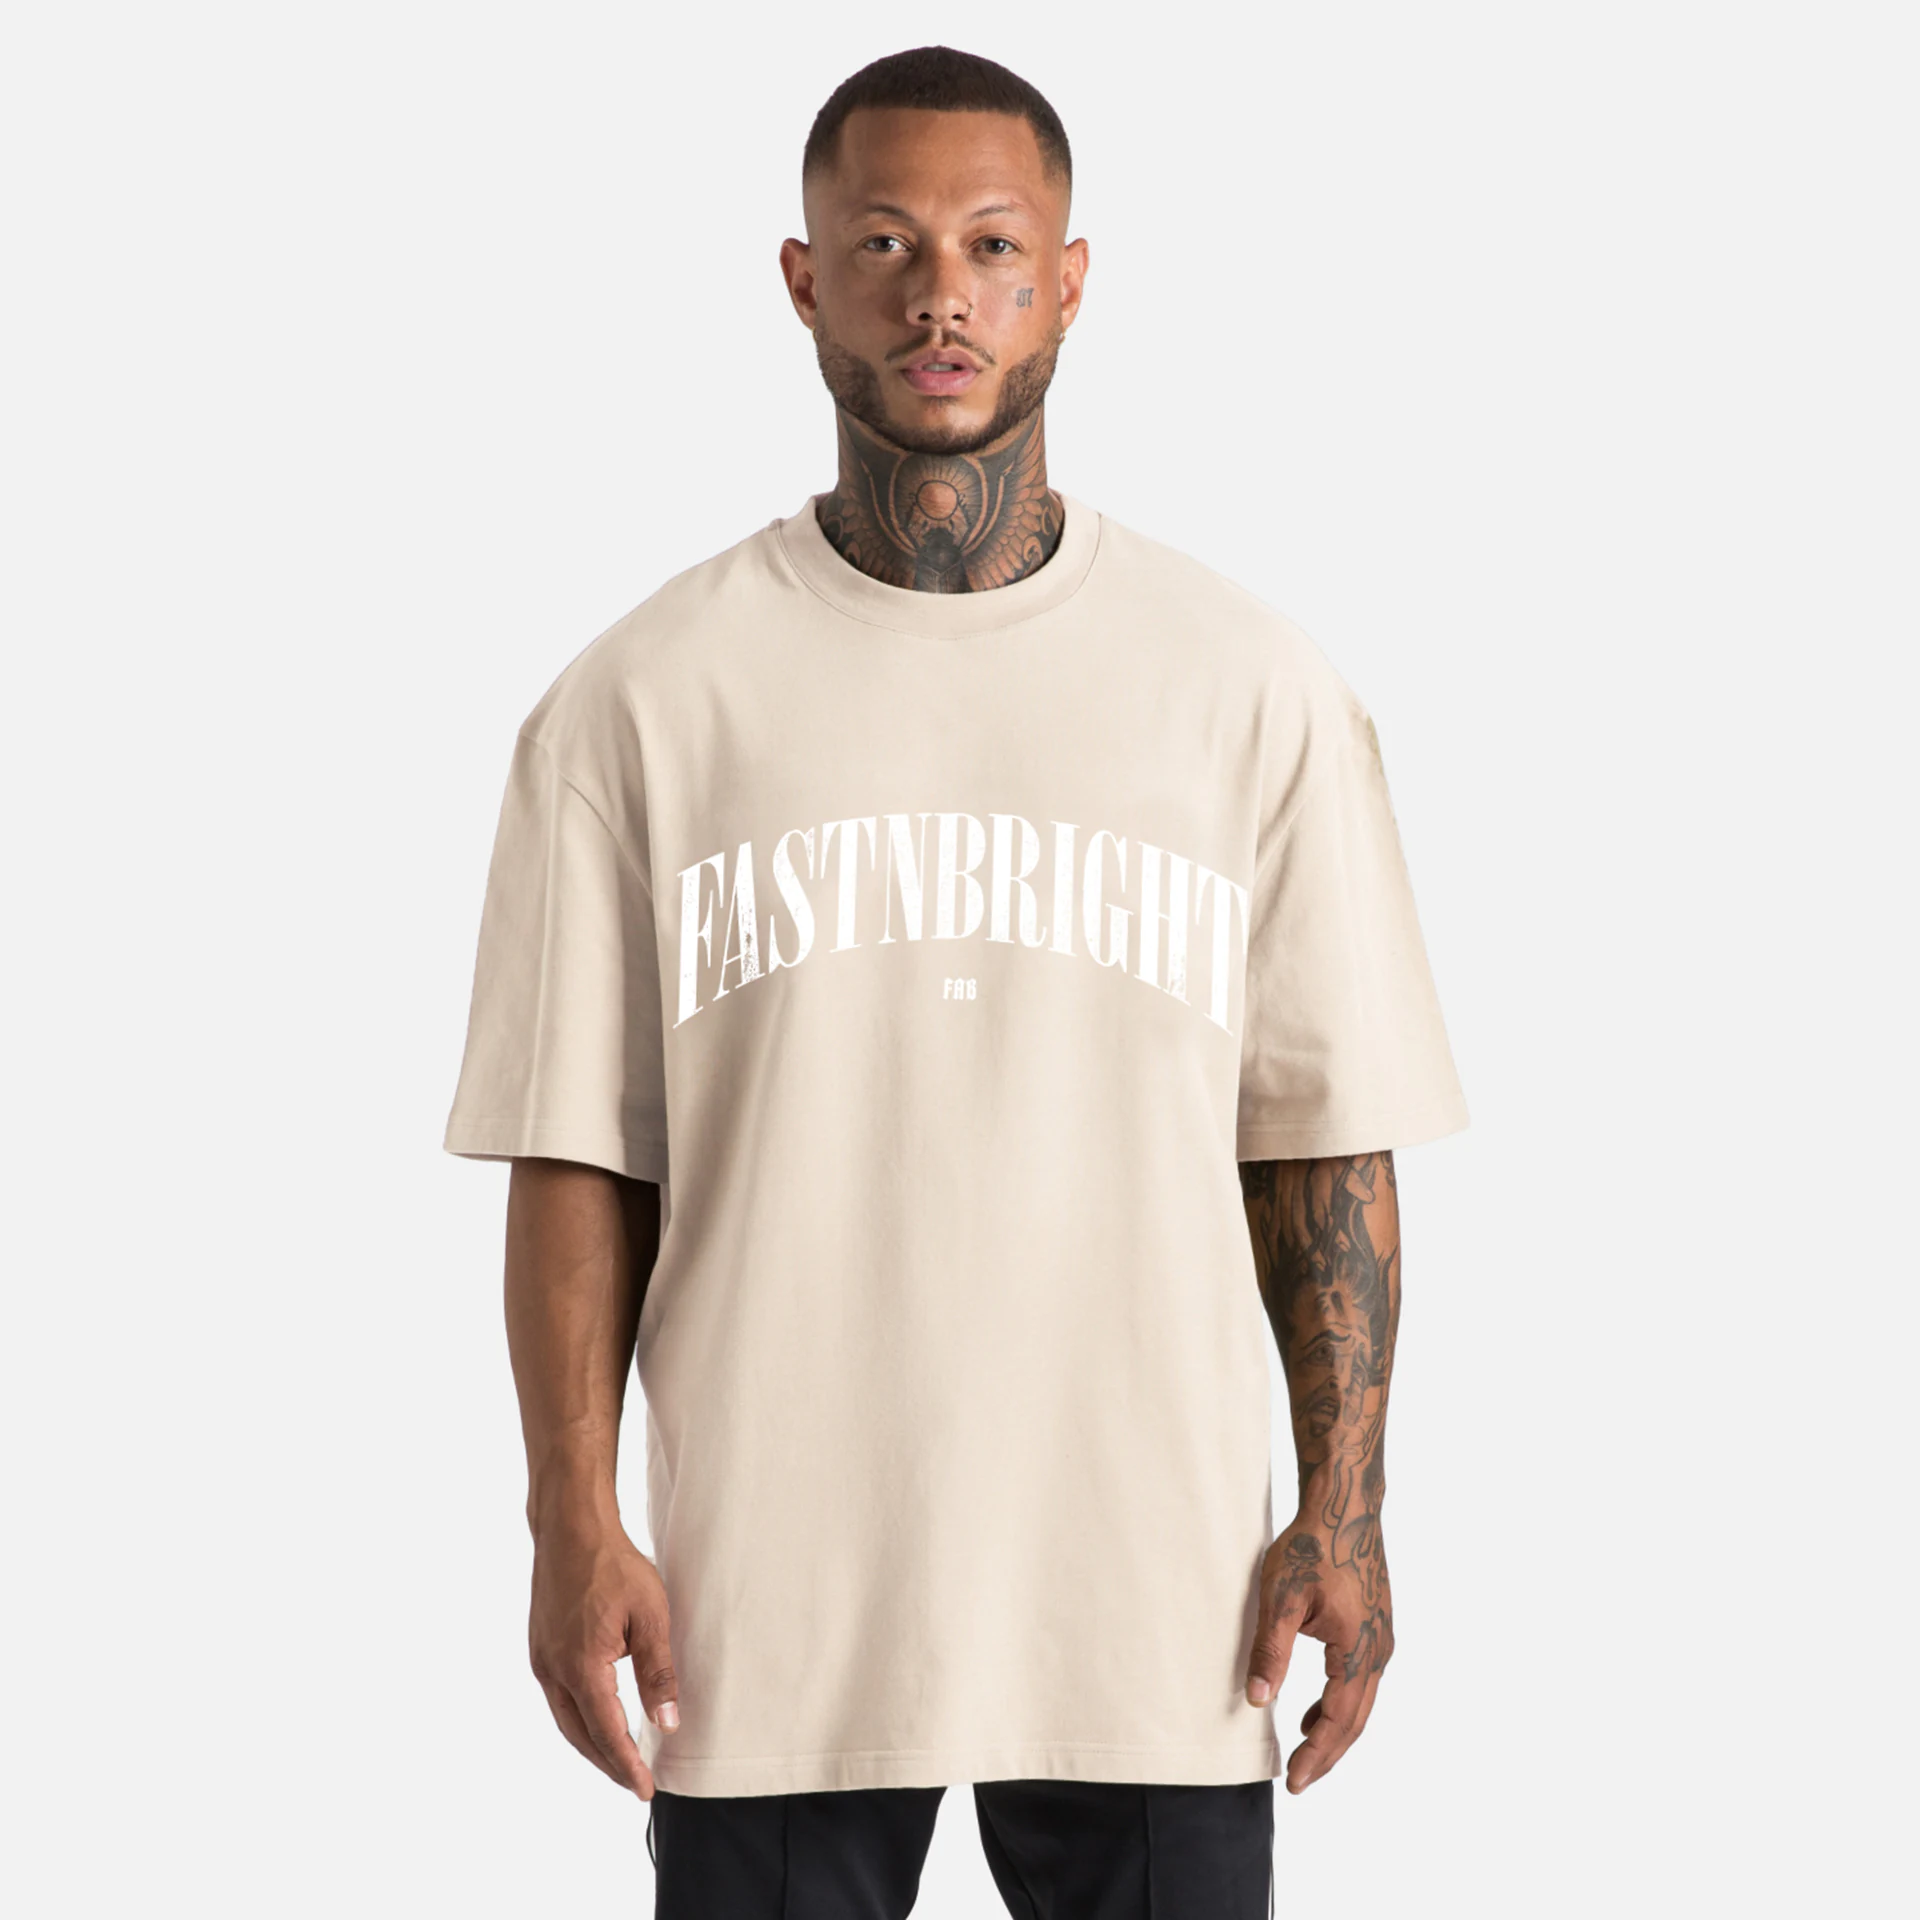 Fast and Bright FAB T-Shirt Cream